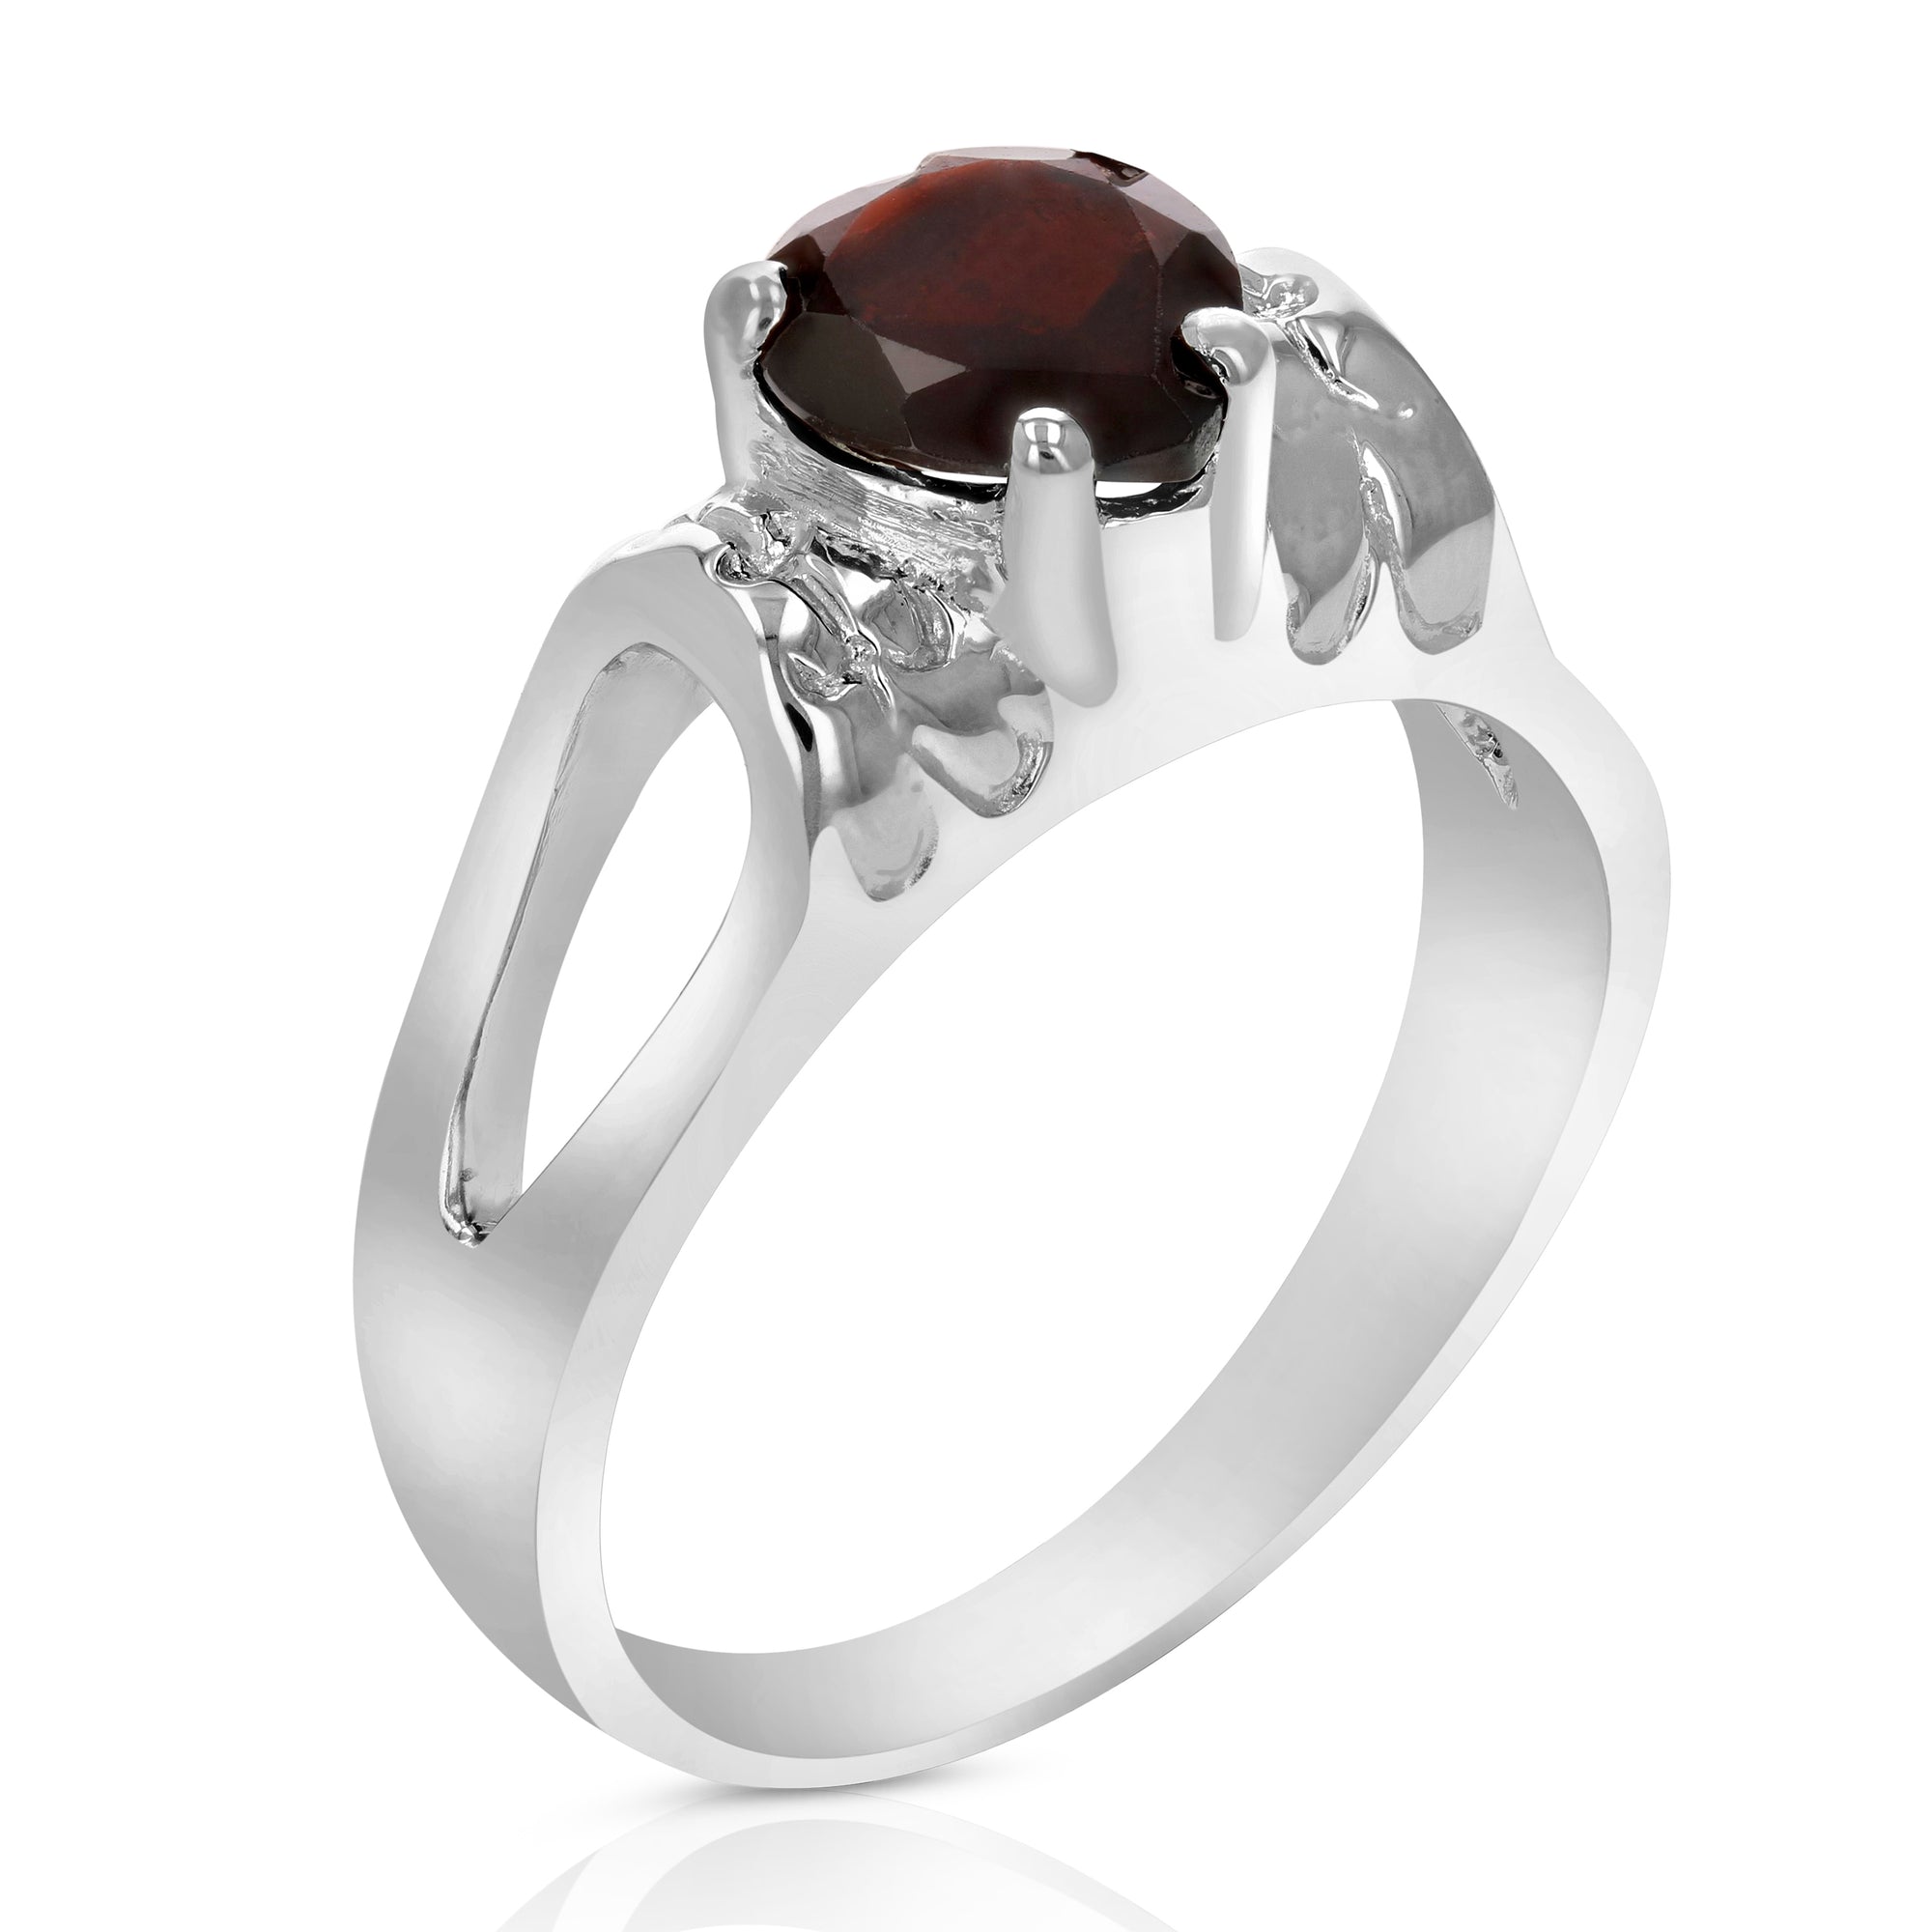 1 cttw Heart Shape Garnet Ring in .925 Sterling Silver with Rhodium Plating